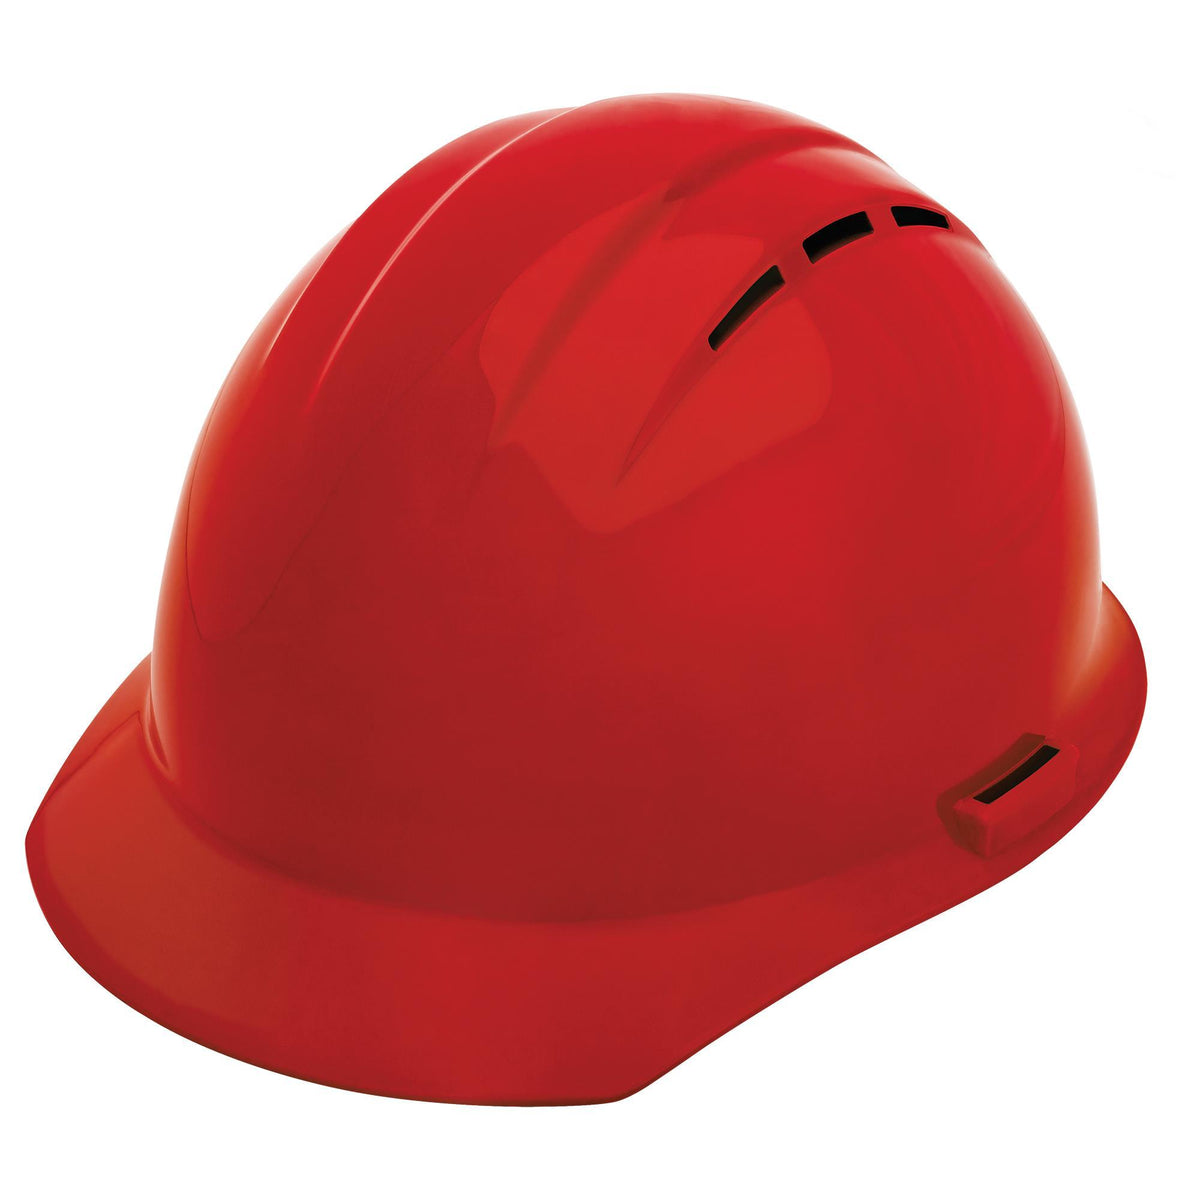 Americana® Vented Cap with 4-Point Suspension